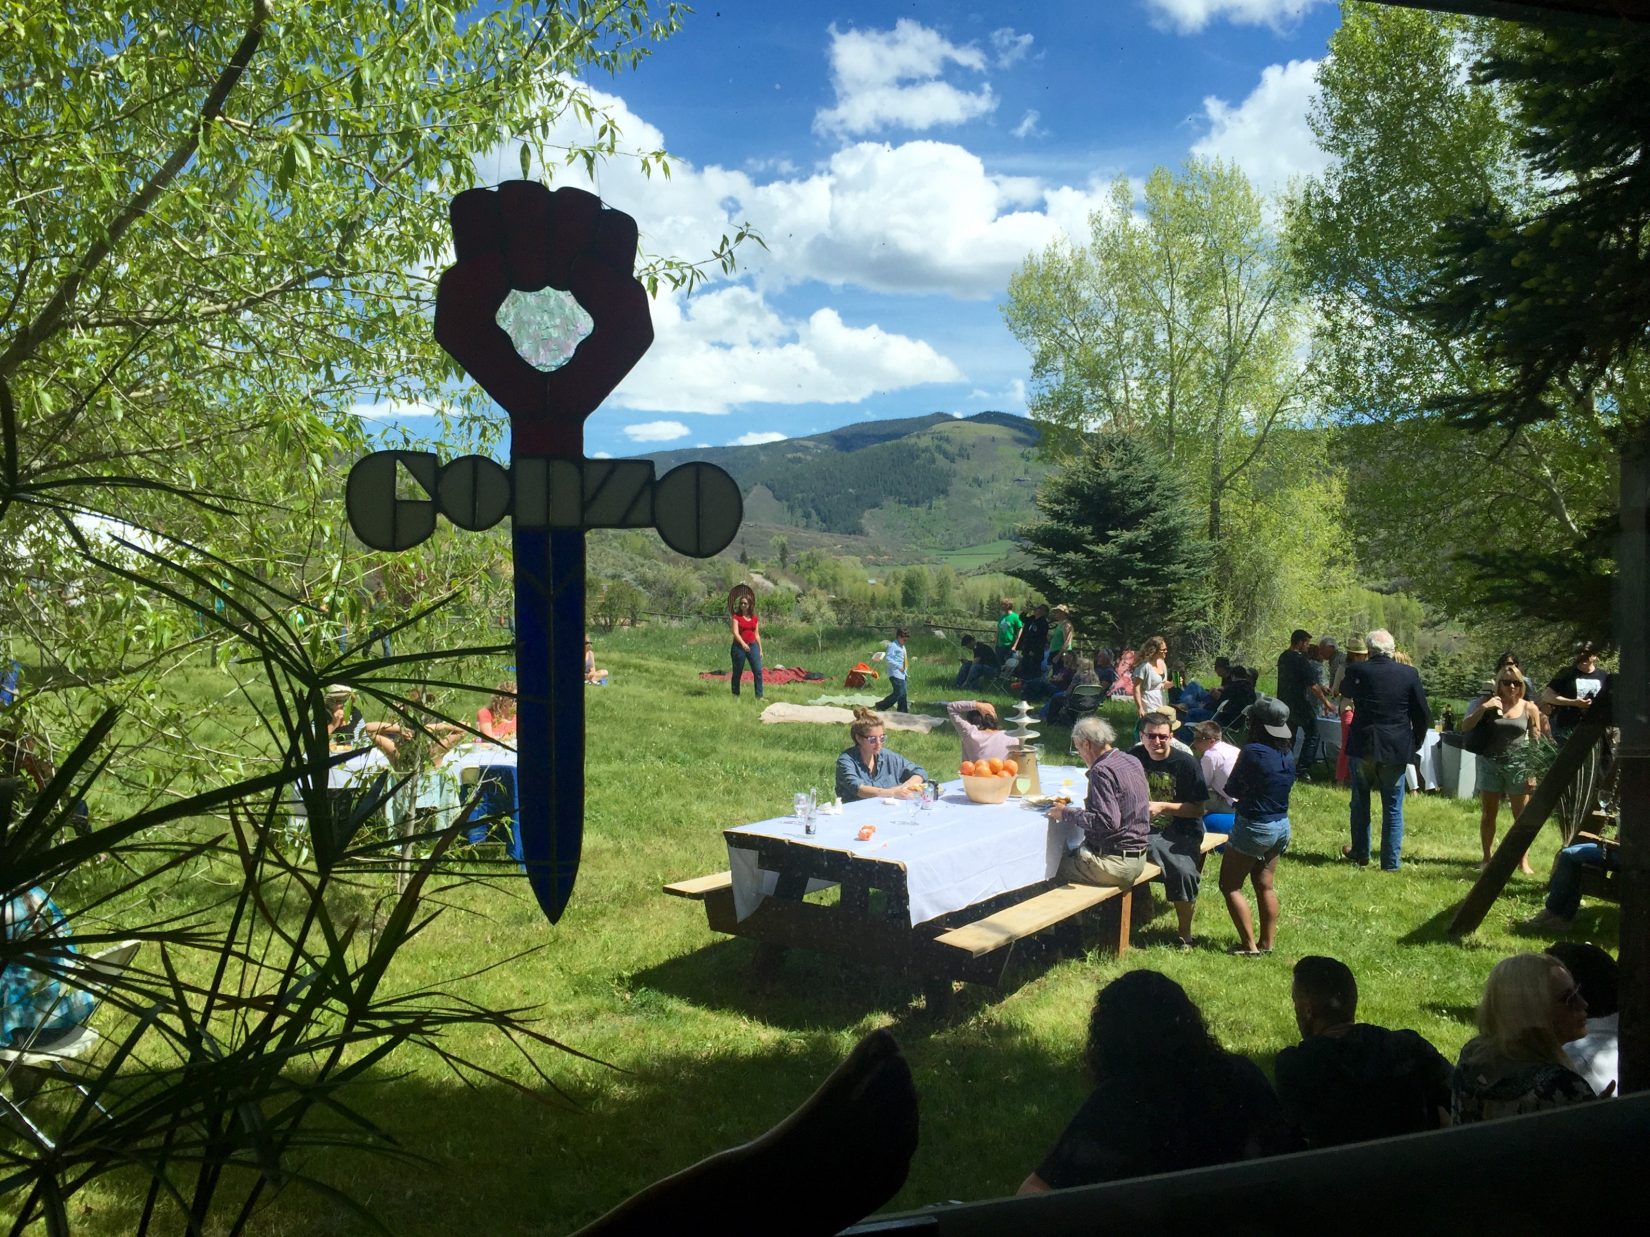 The view from Anita Thompson's house on Owl Farm, with NORML's annual Aspen barbecue in the background. (Katie Shapiro, The Cannabist)